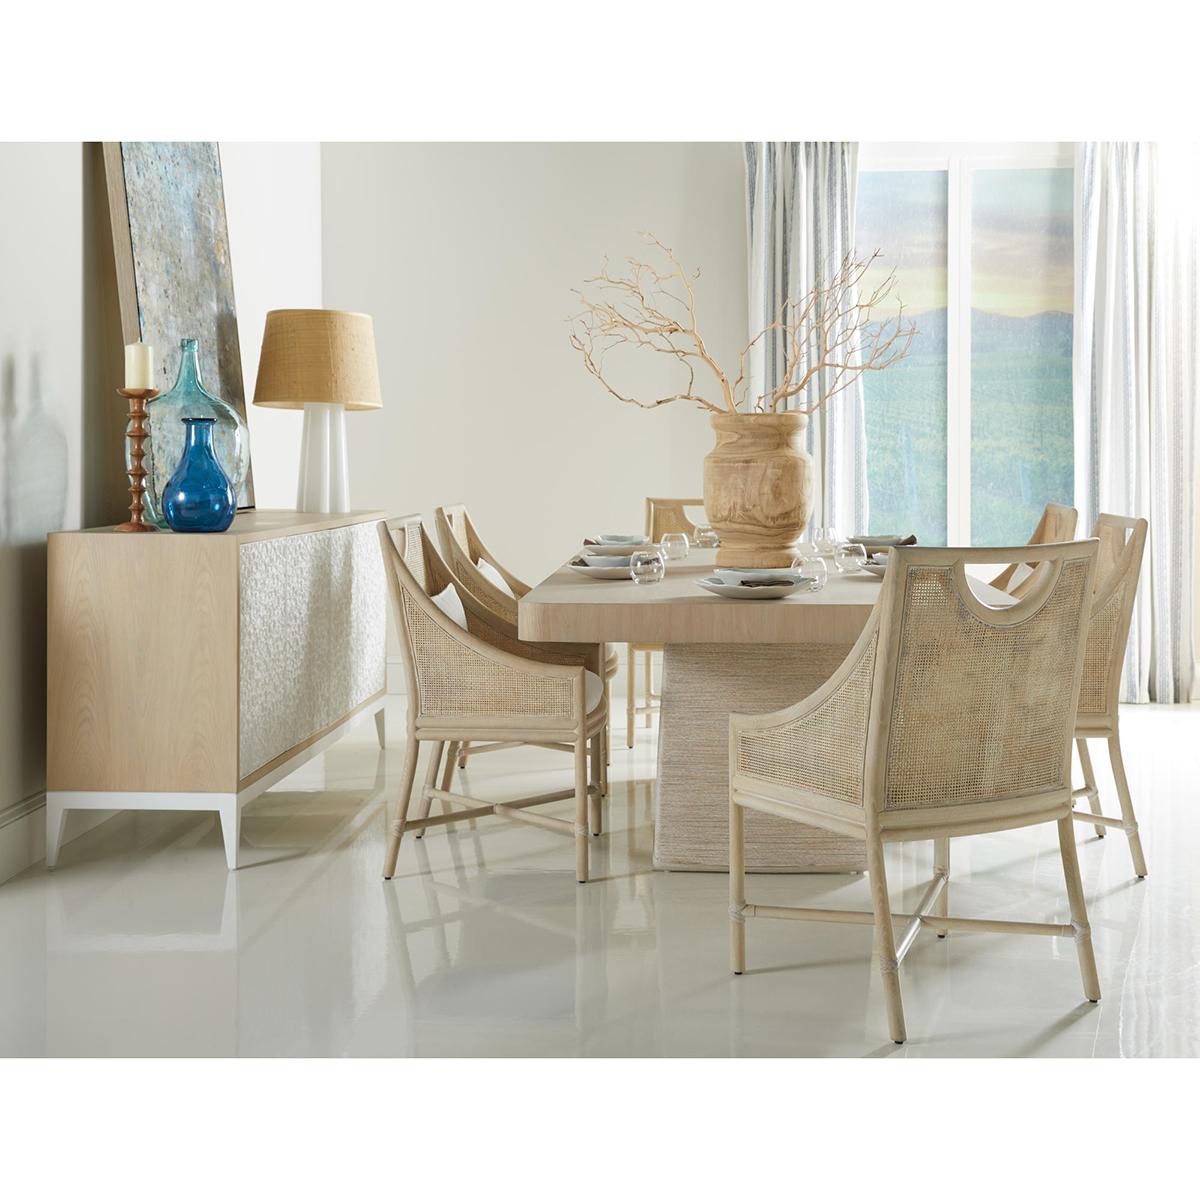 Fabric Modern Coastal Dining Chairs For Sale